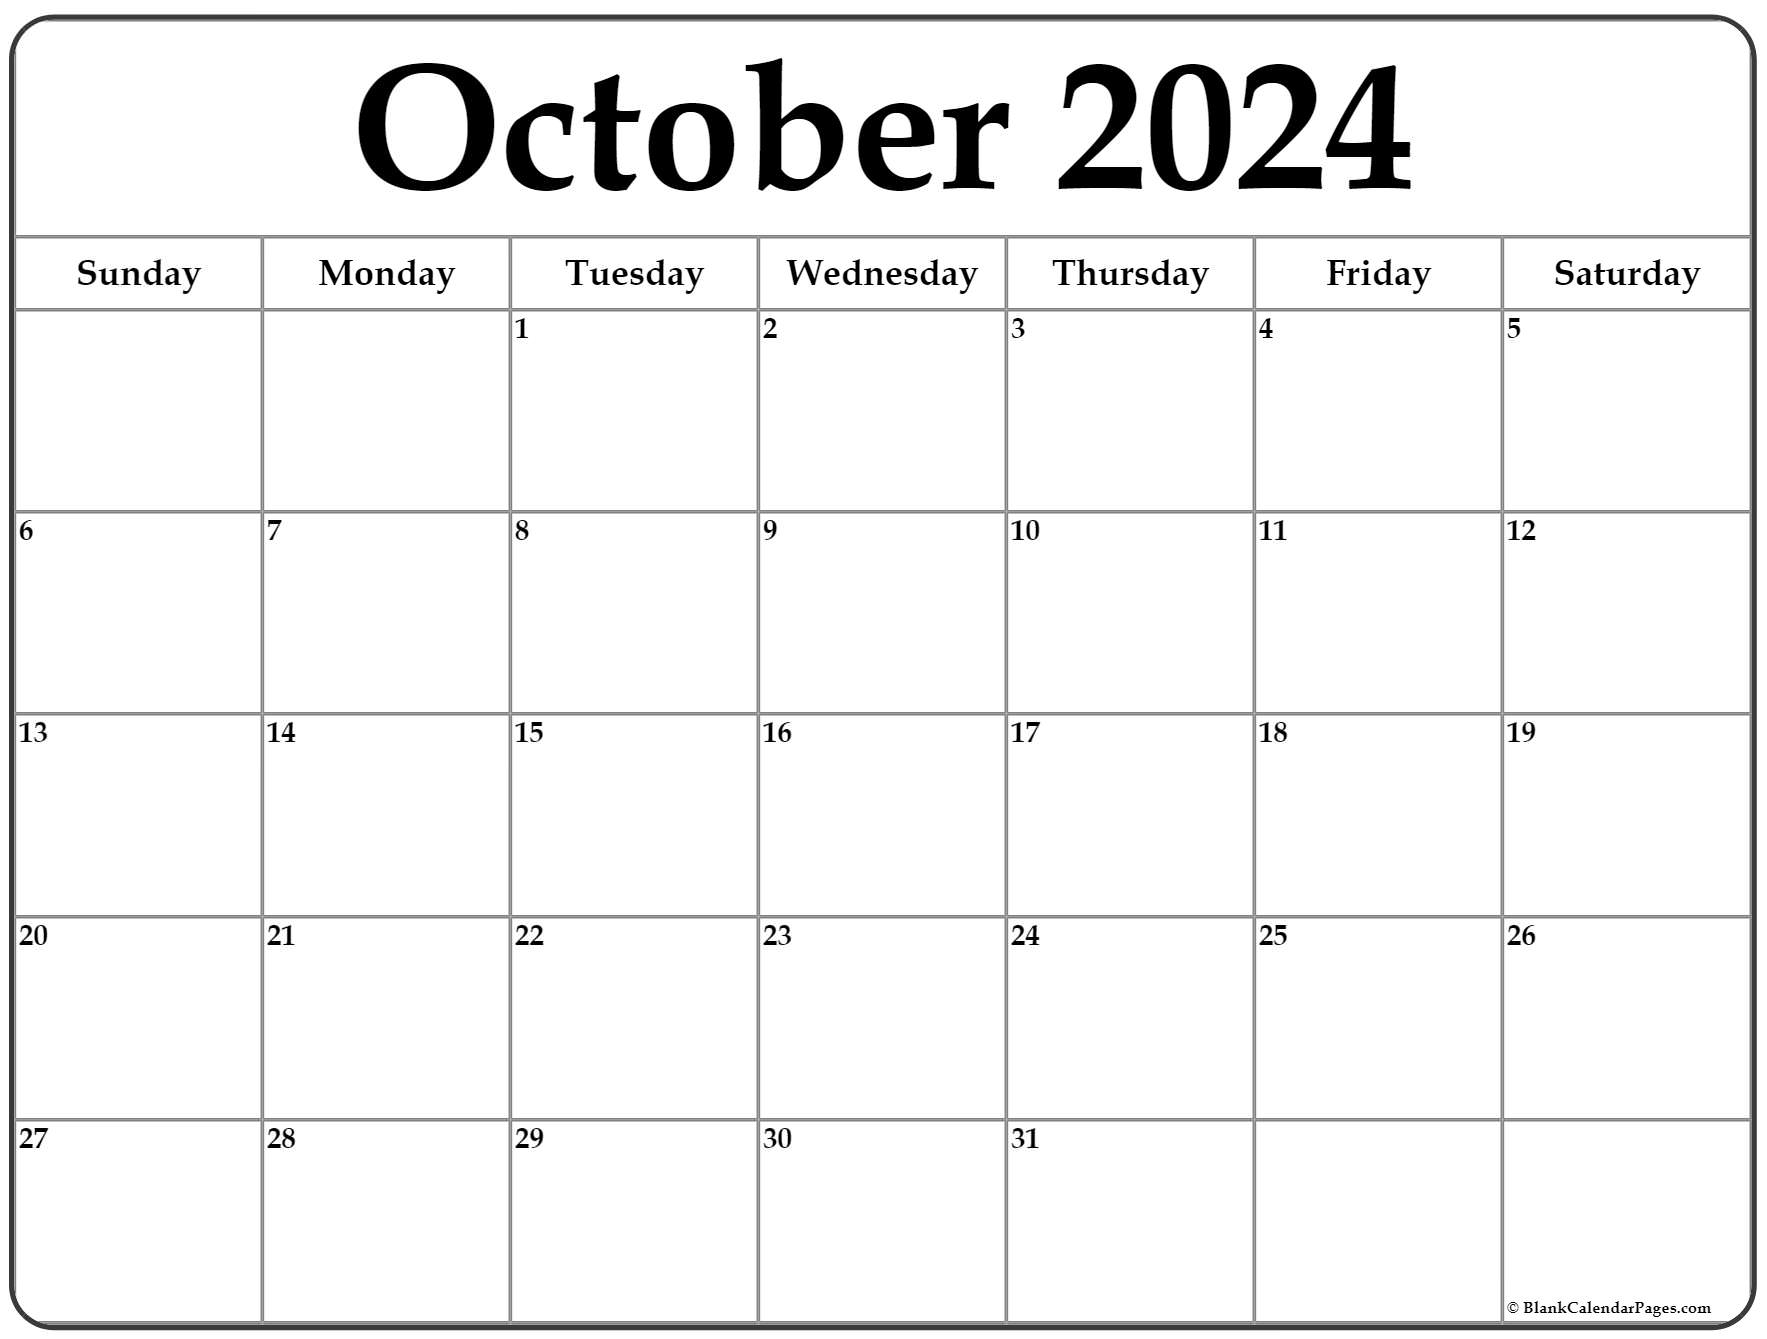 Free Printable Monthly Calendar October 2022 October 2022 Calendar | Free Printable Calendar Templates